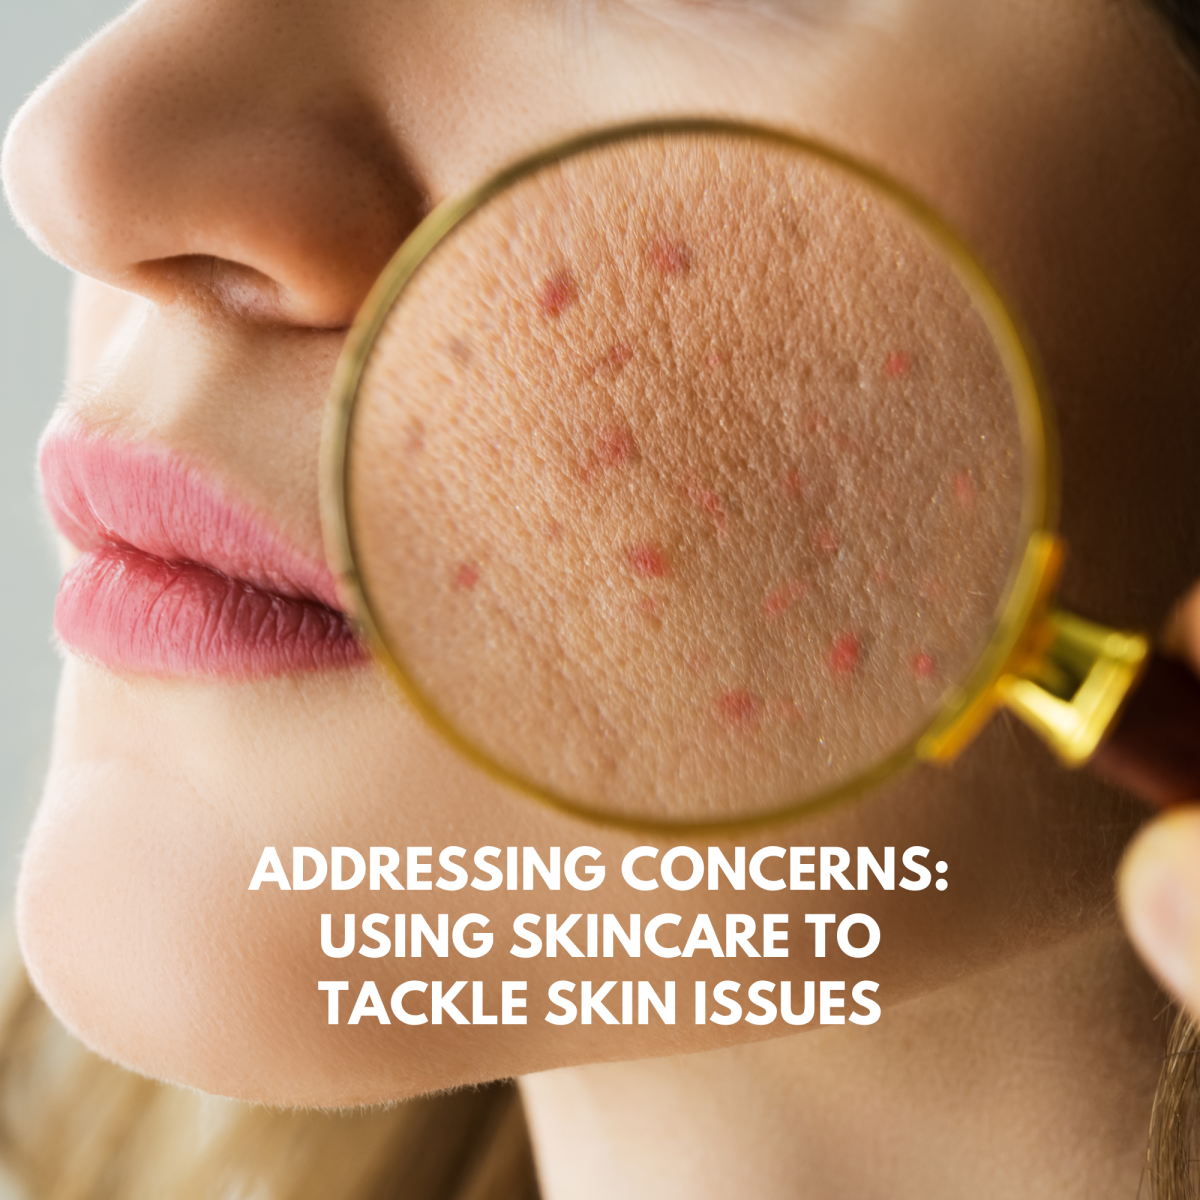 Addressing Concerns: Using Skincare to Tackle Skin Issues